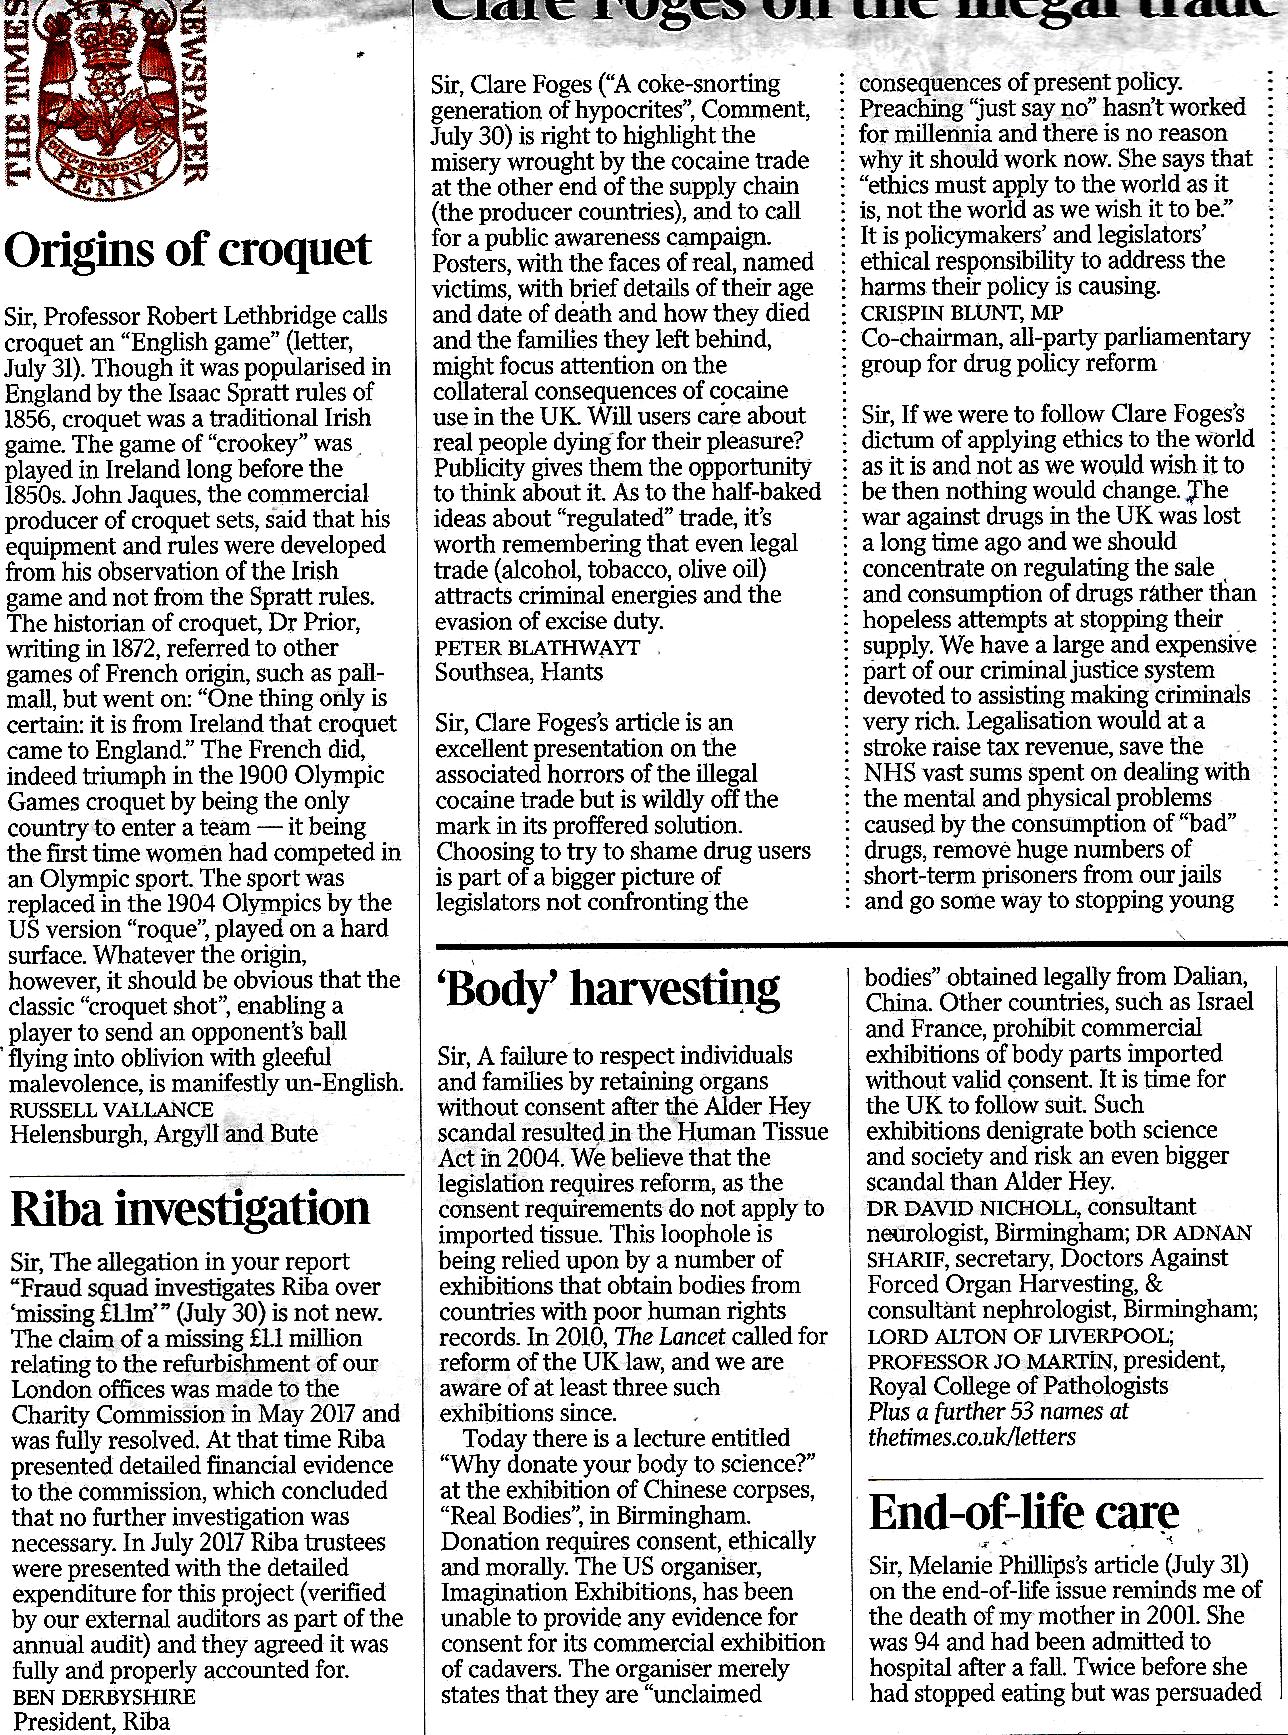 2018 August 2nd Body Harvesting letter to The Times